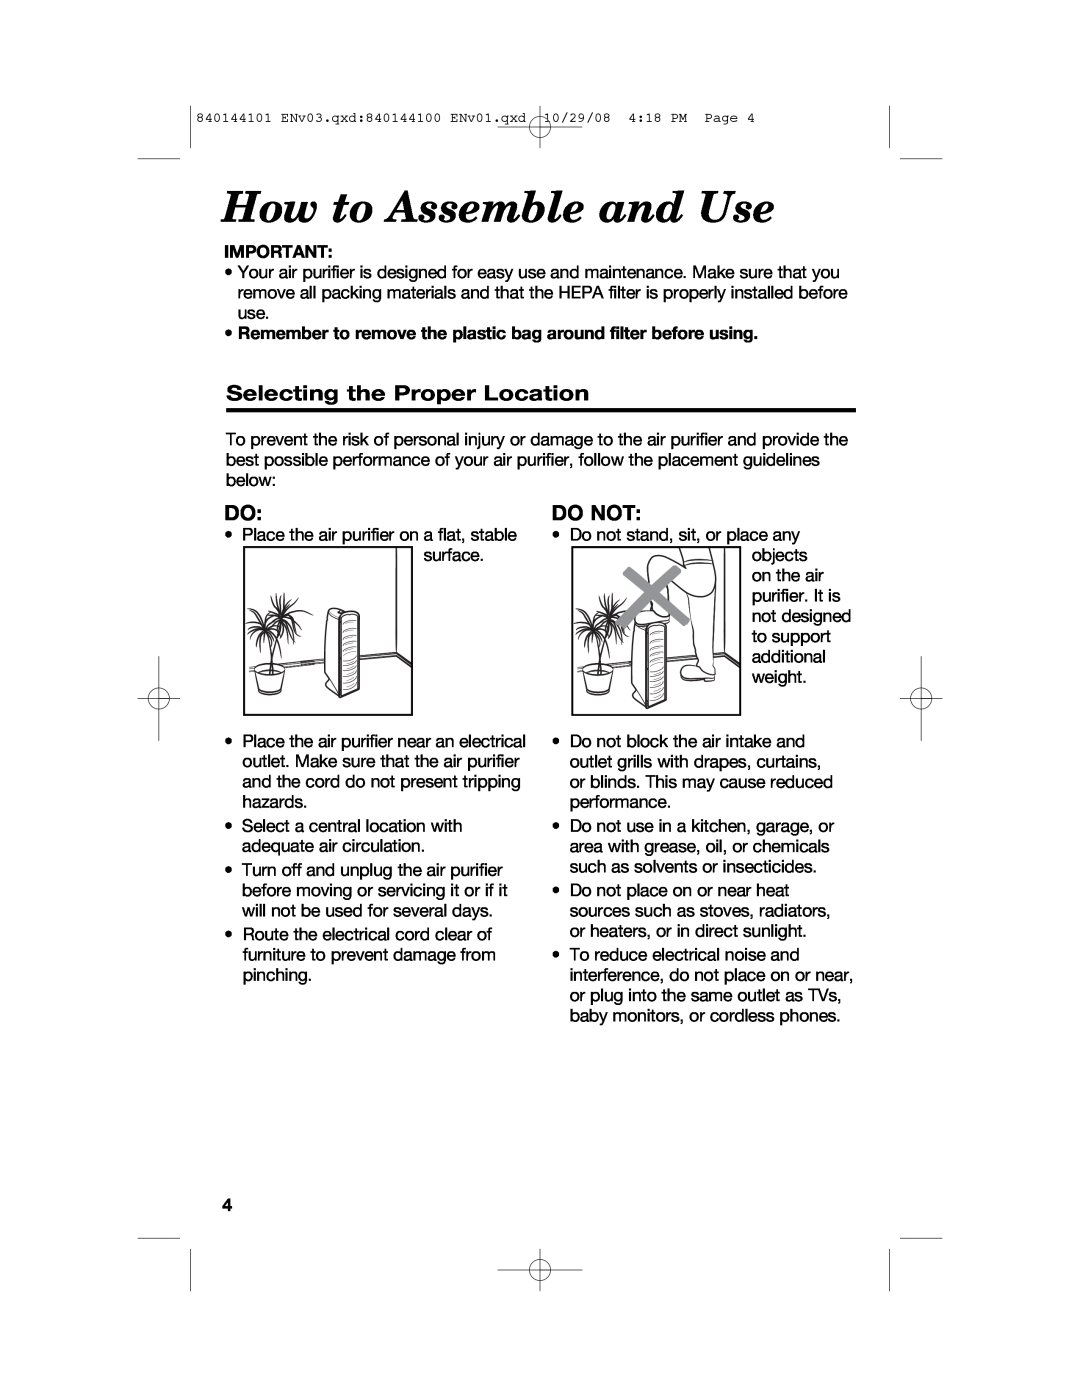 Hamilton Beach 840144101 manual How to Assemble and Use, Selecting the Proper Location, Do Not 